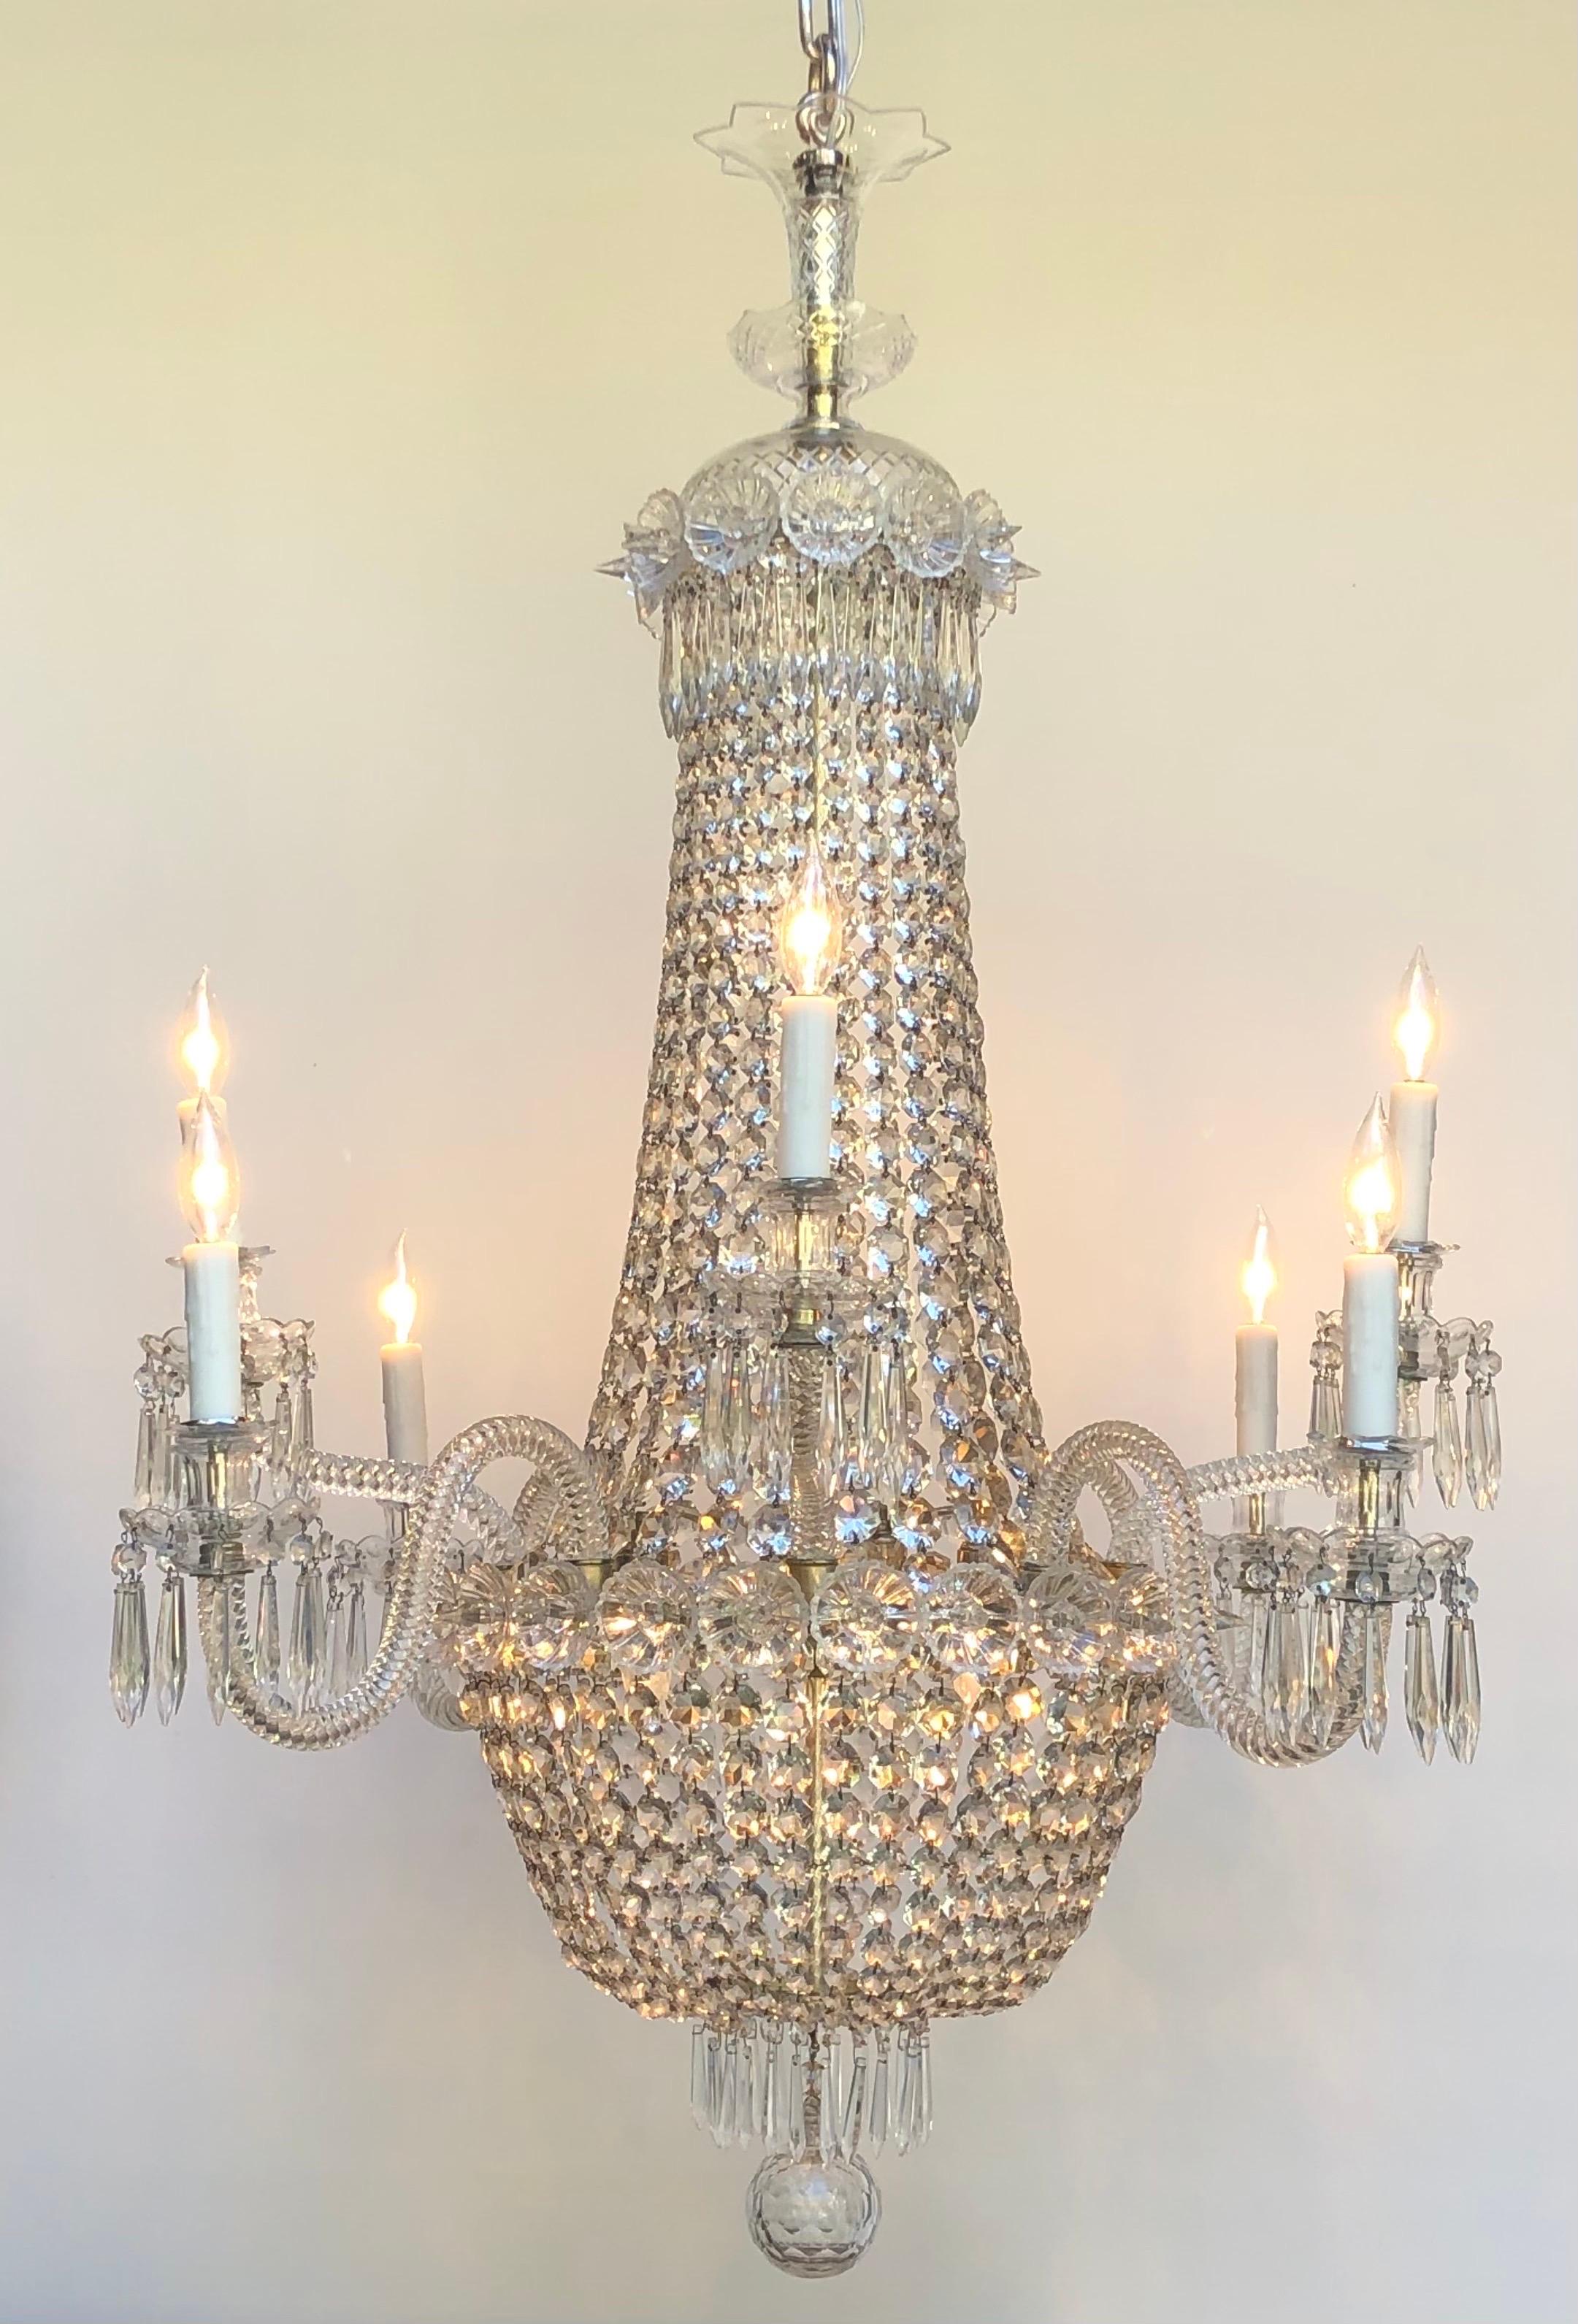 Regency Tent-and-Basket Silver Plate & Crystal Chandelier / Gasolier Eight Light For Sale 6